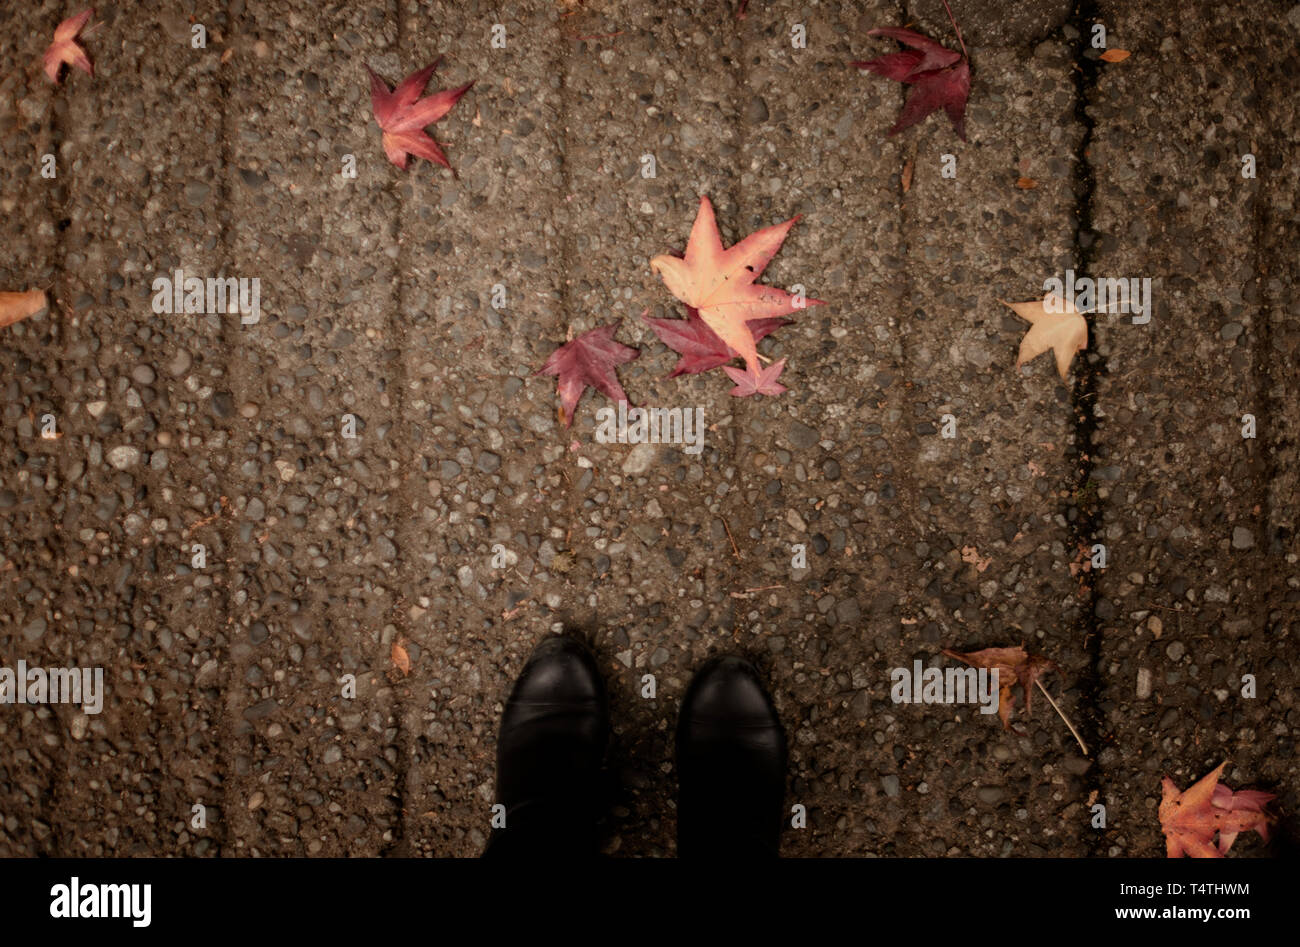 Two feet on a sidewalk in the fall with leaves on the ground Stock Photo